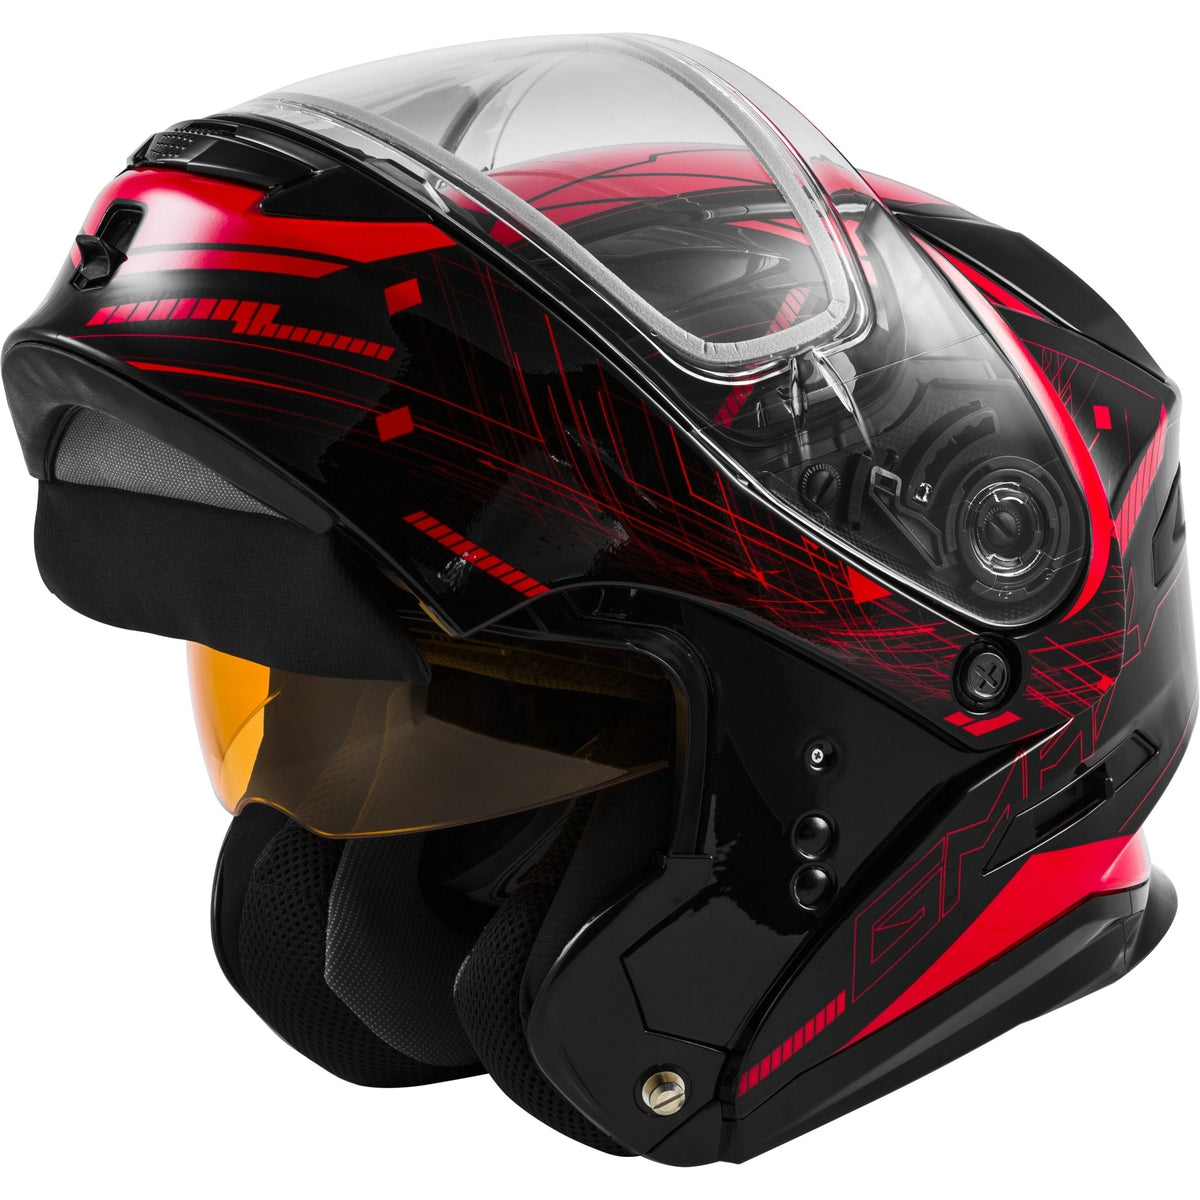 GMax MD01 Modular Helmet with Electric Shield